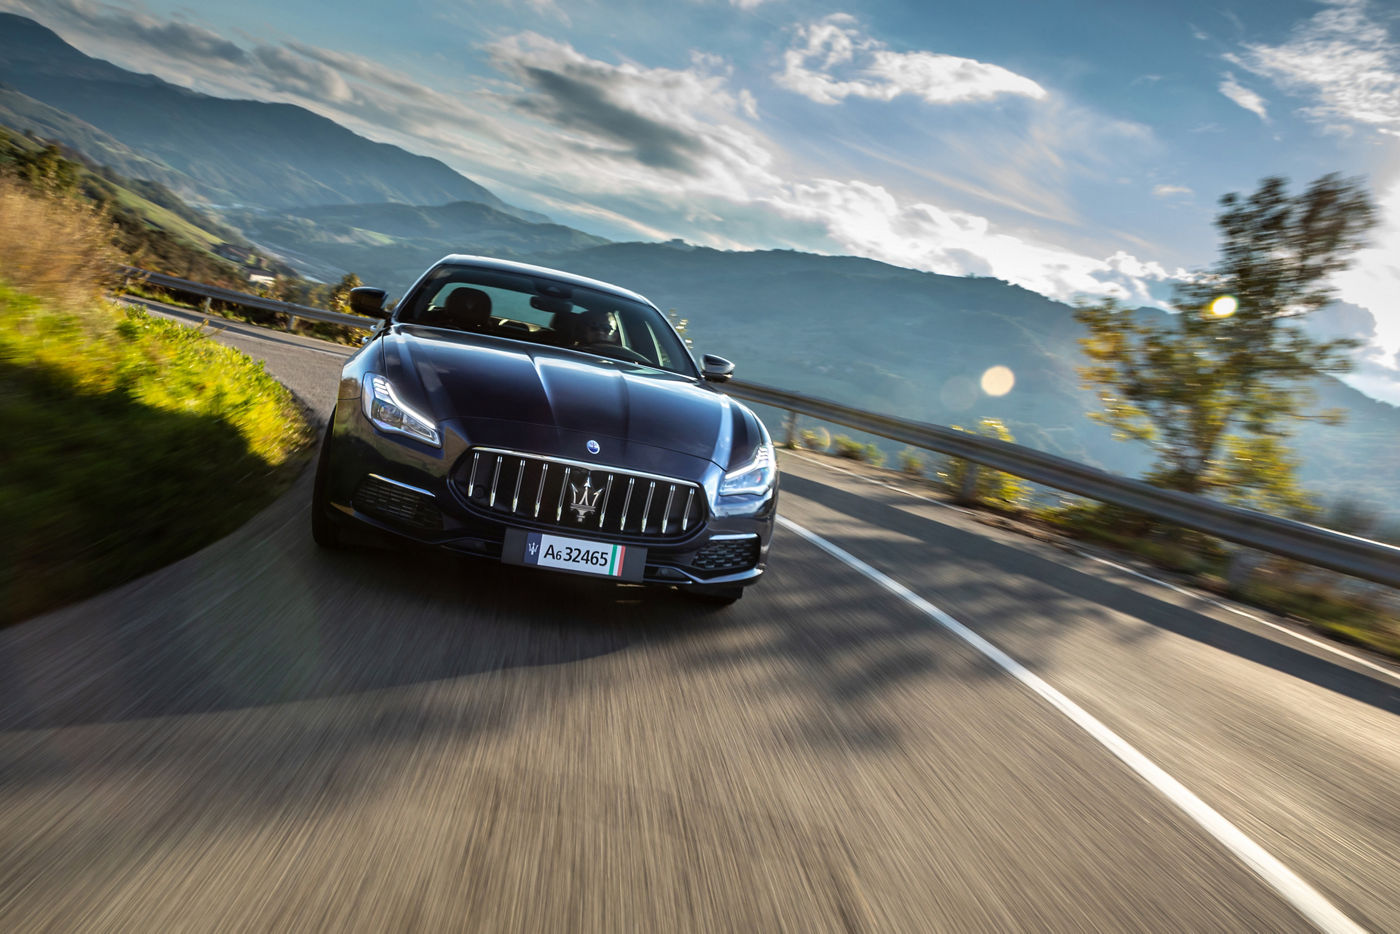 large-17460-v6-collection-quattroporte-sq4-granlusso-my21